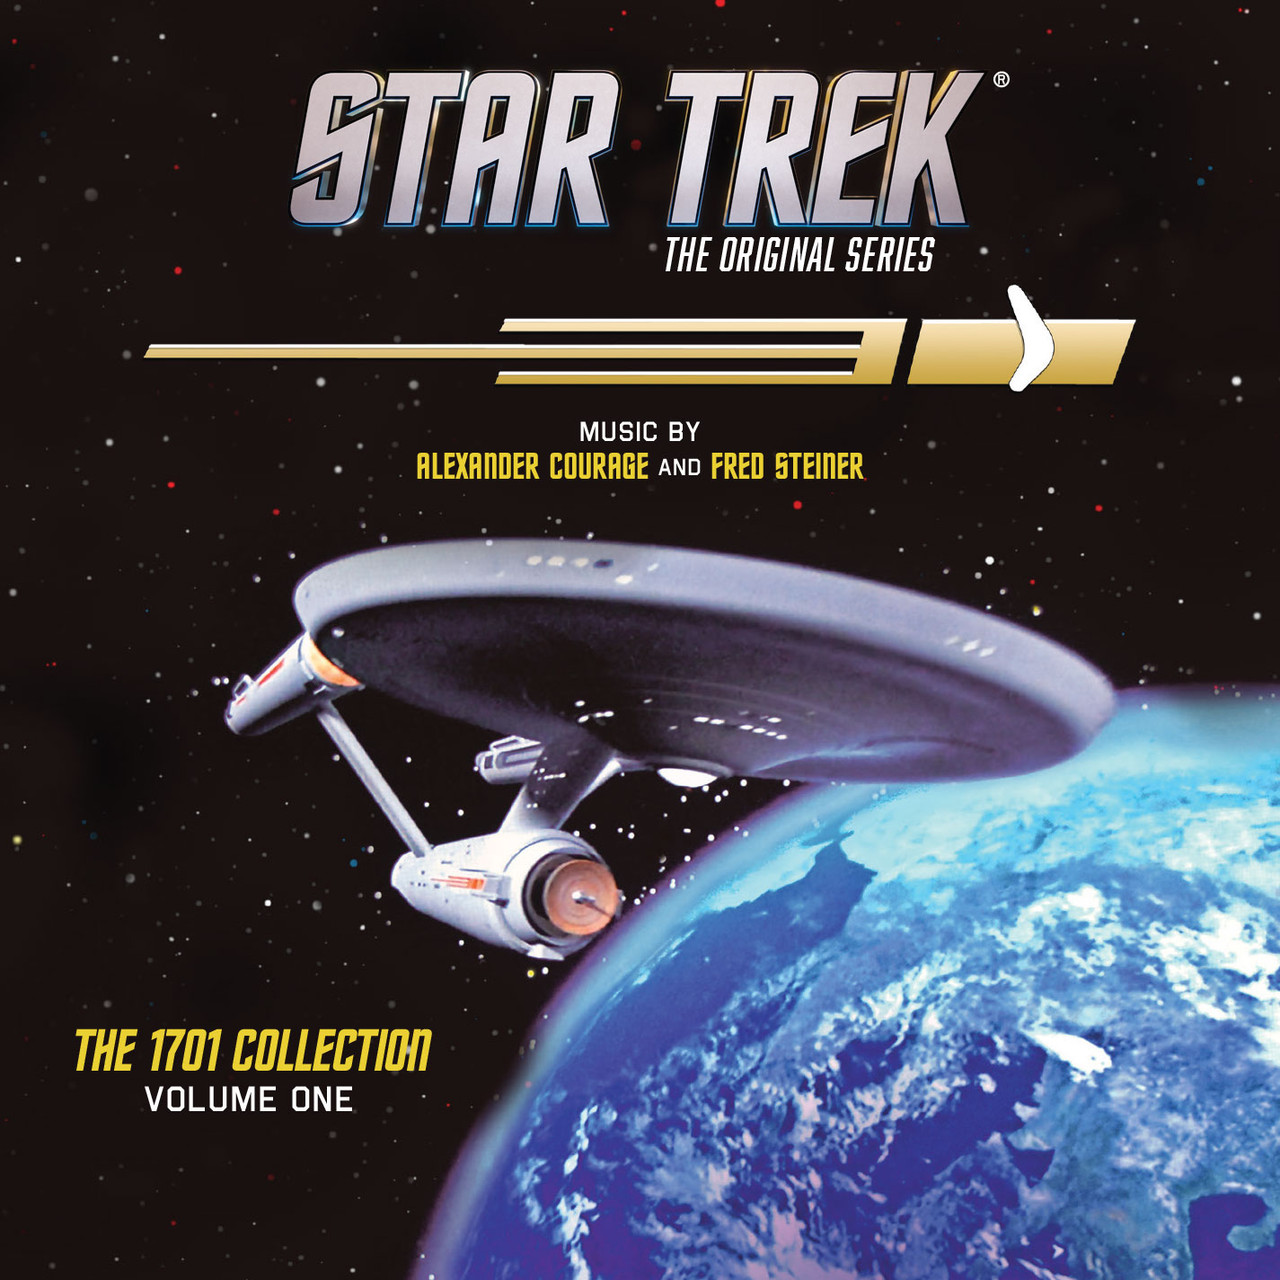 Star Trek: The Original Series  The 1701 Collection Vol One: Limited Edition (2-Cd Set)